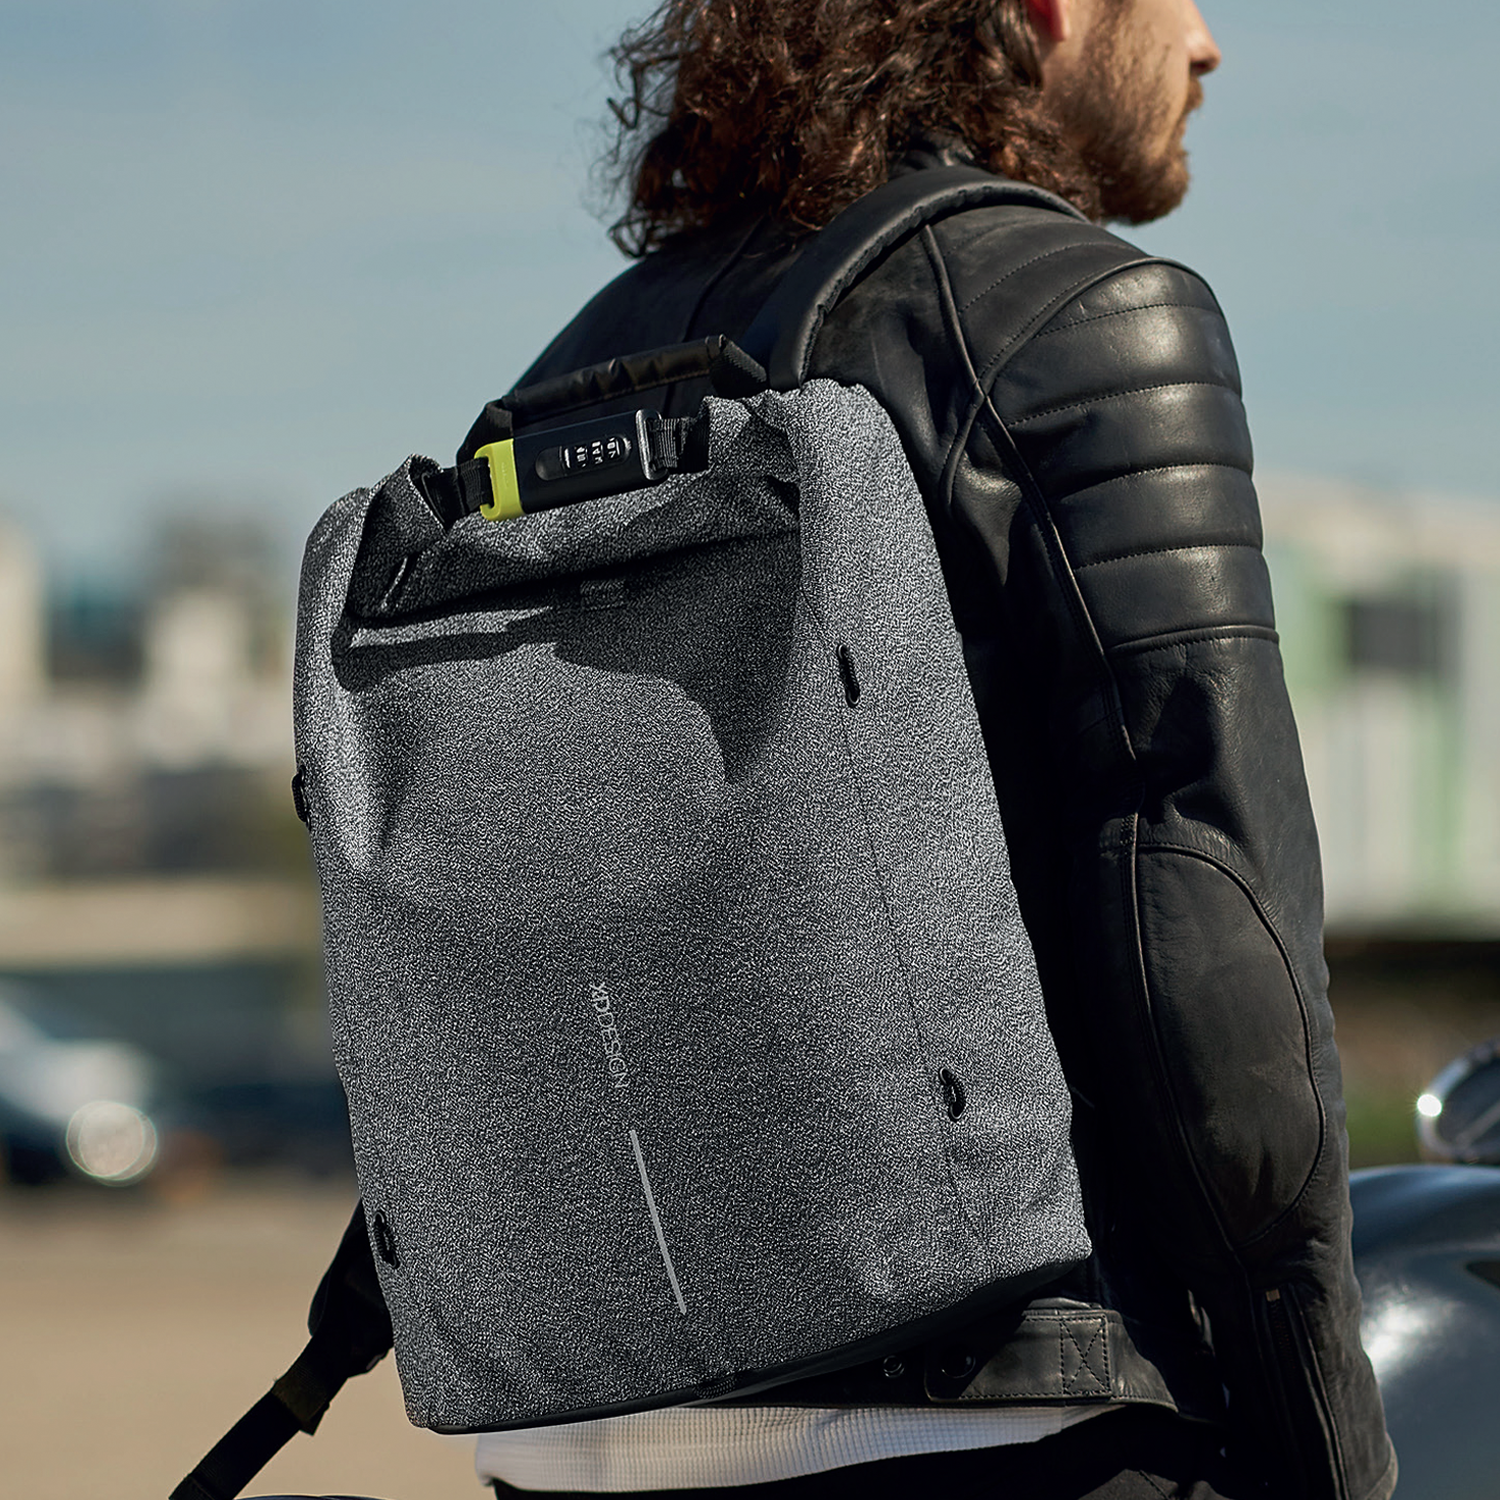 Bobby Urban - The Safest Travel Backpack - XD Design in Malaysia - Storming Gravity